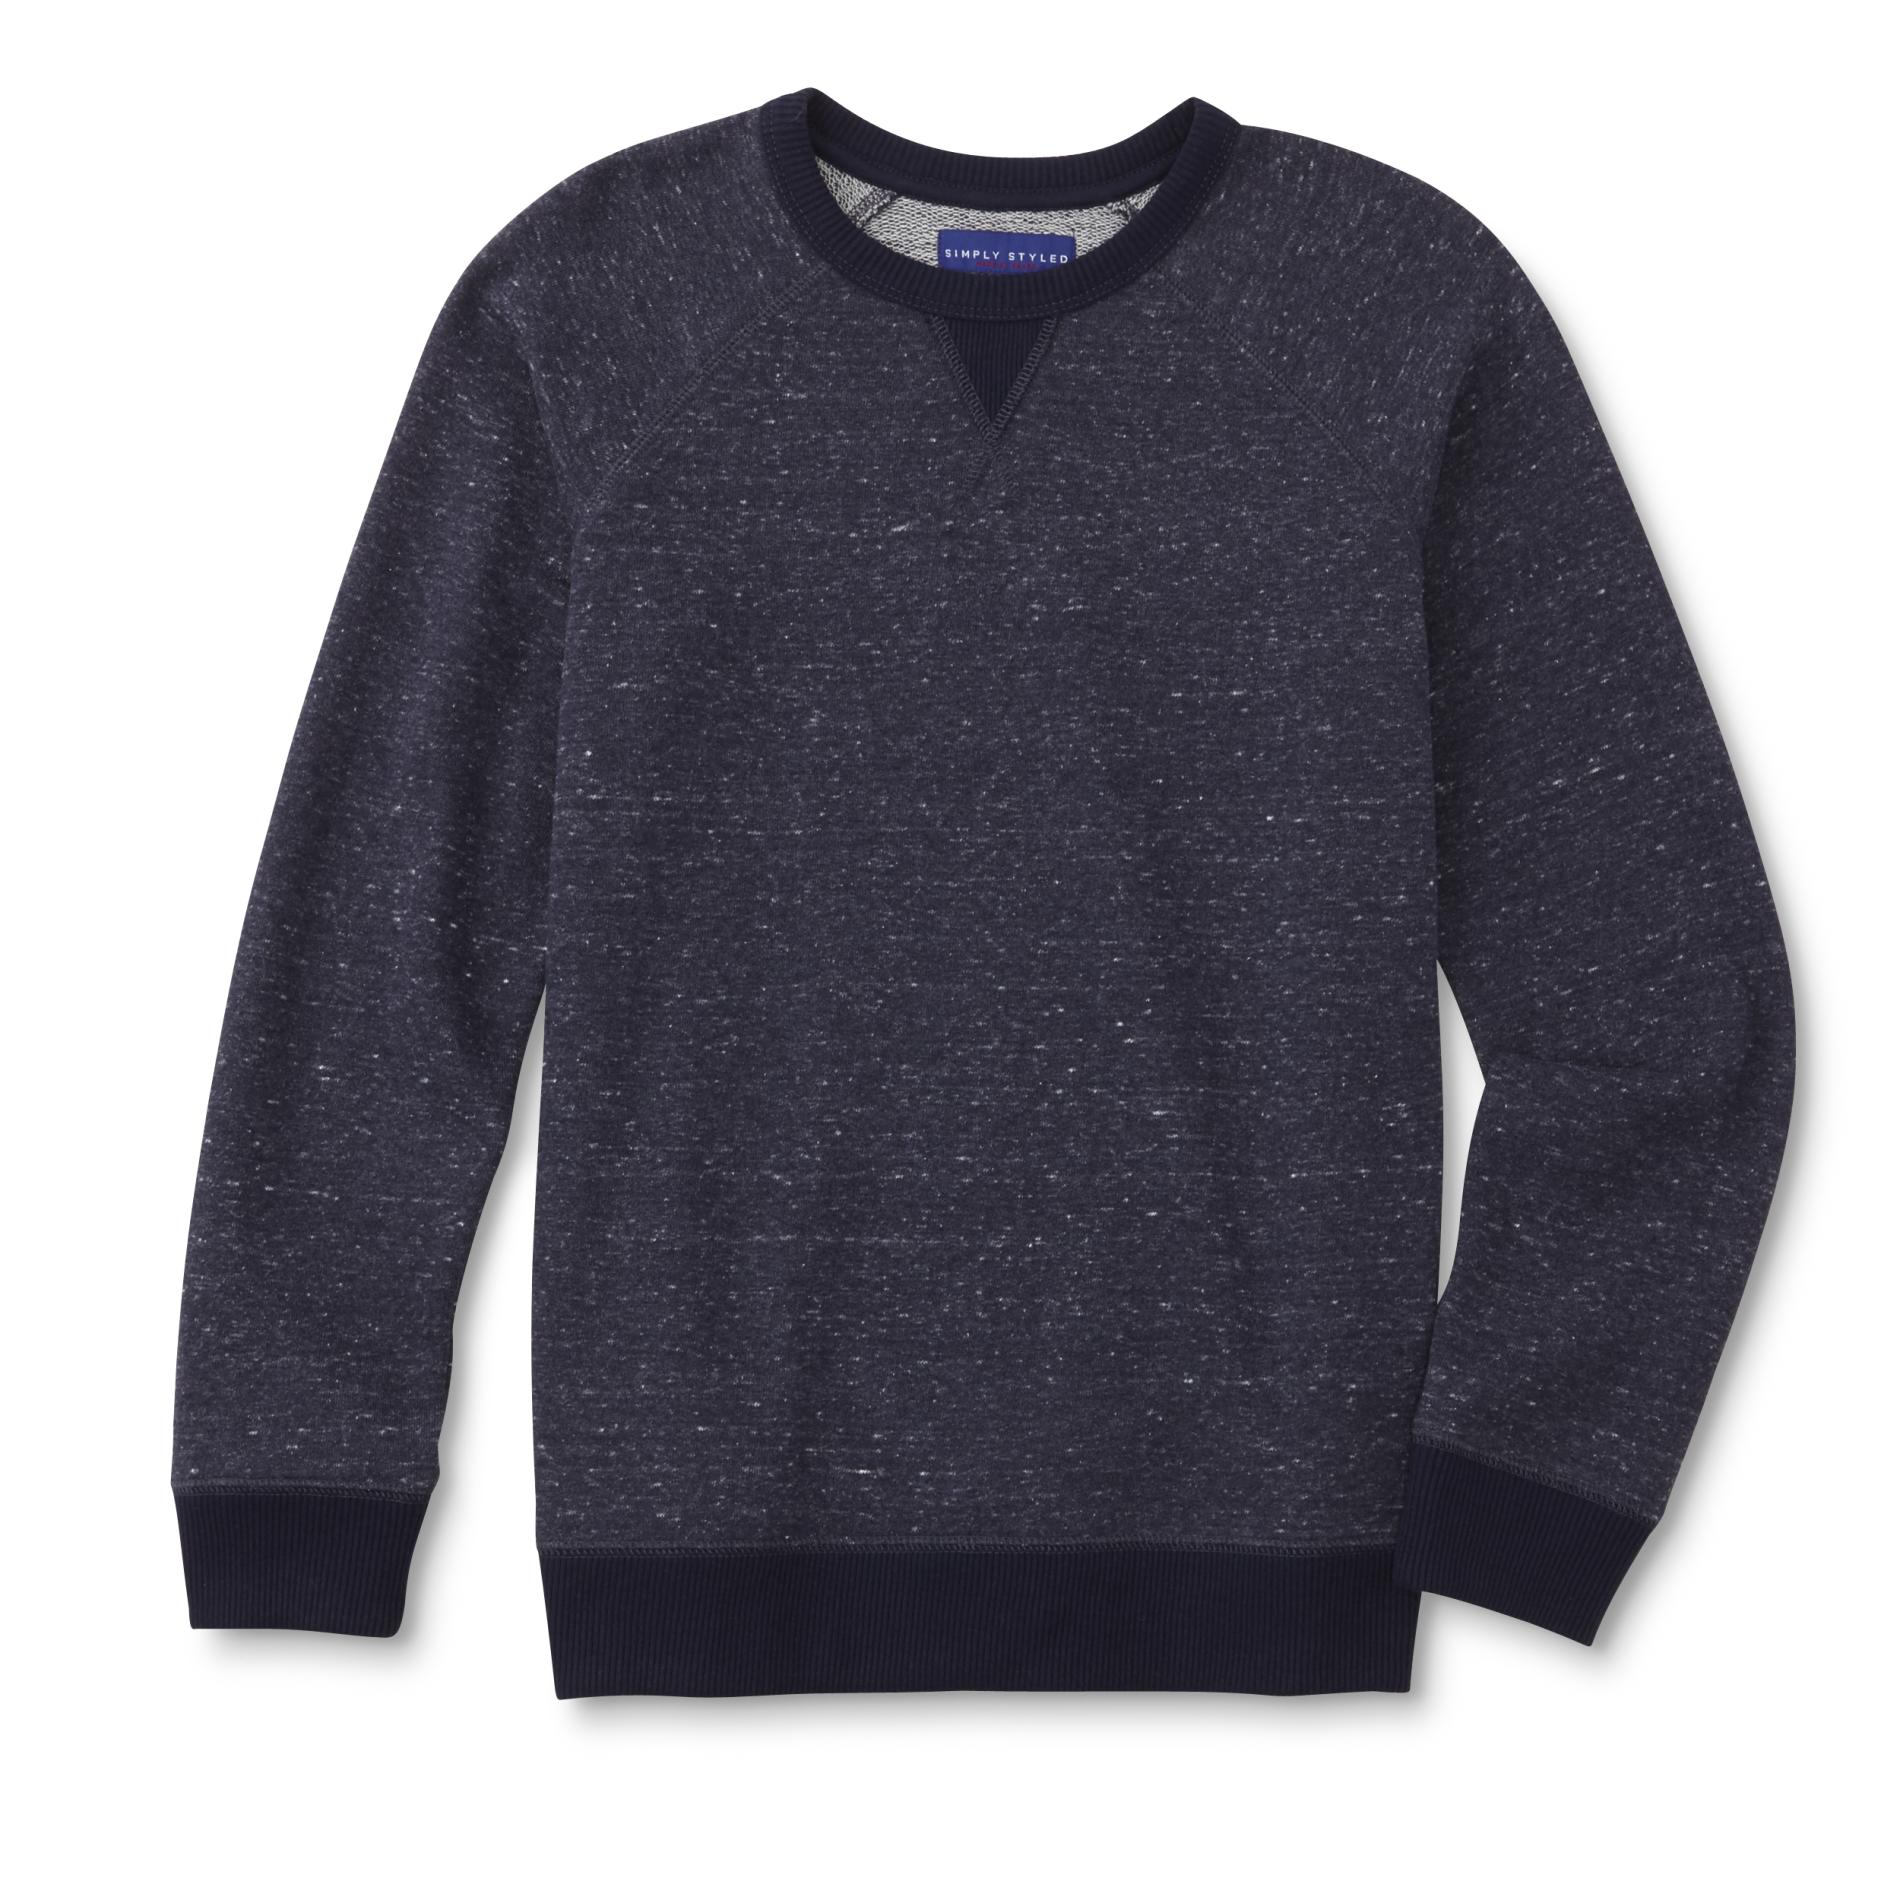 Simply Styled Boys' French Terry Knit Sweatshirt - Heathered